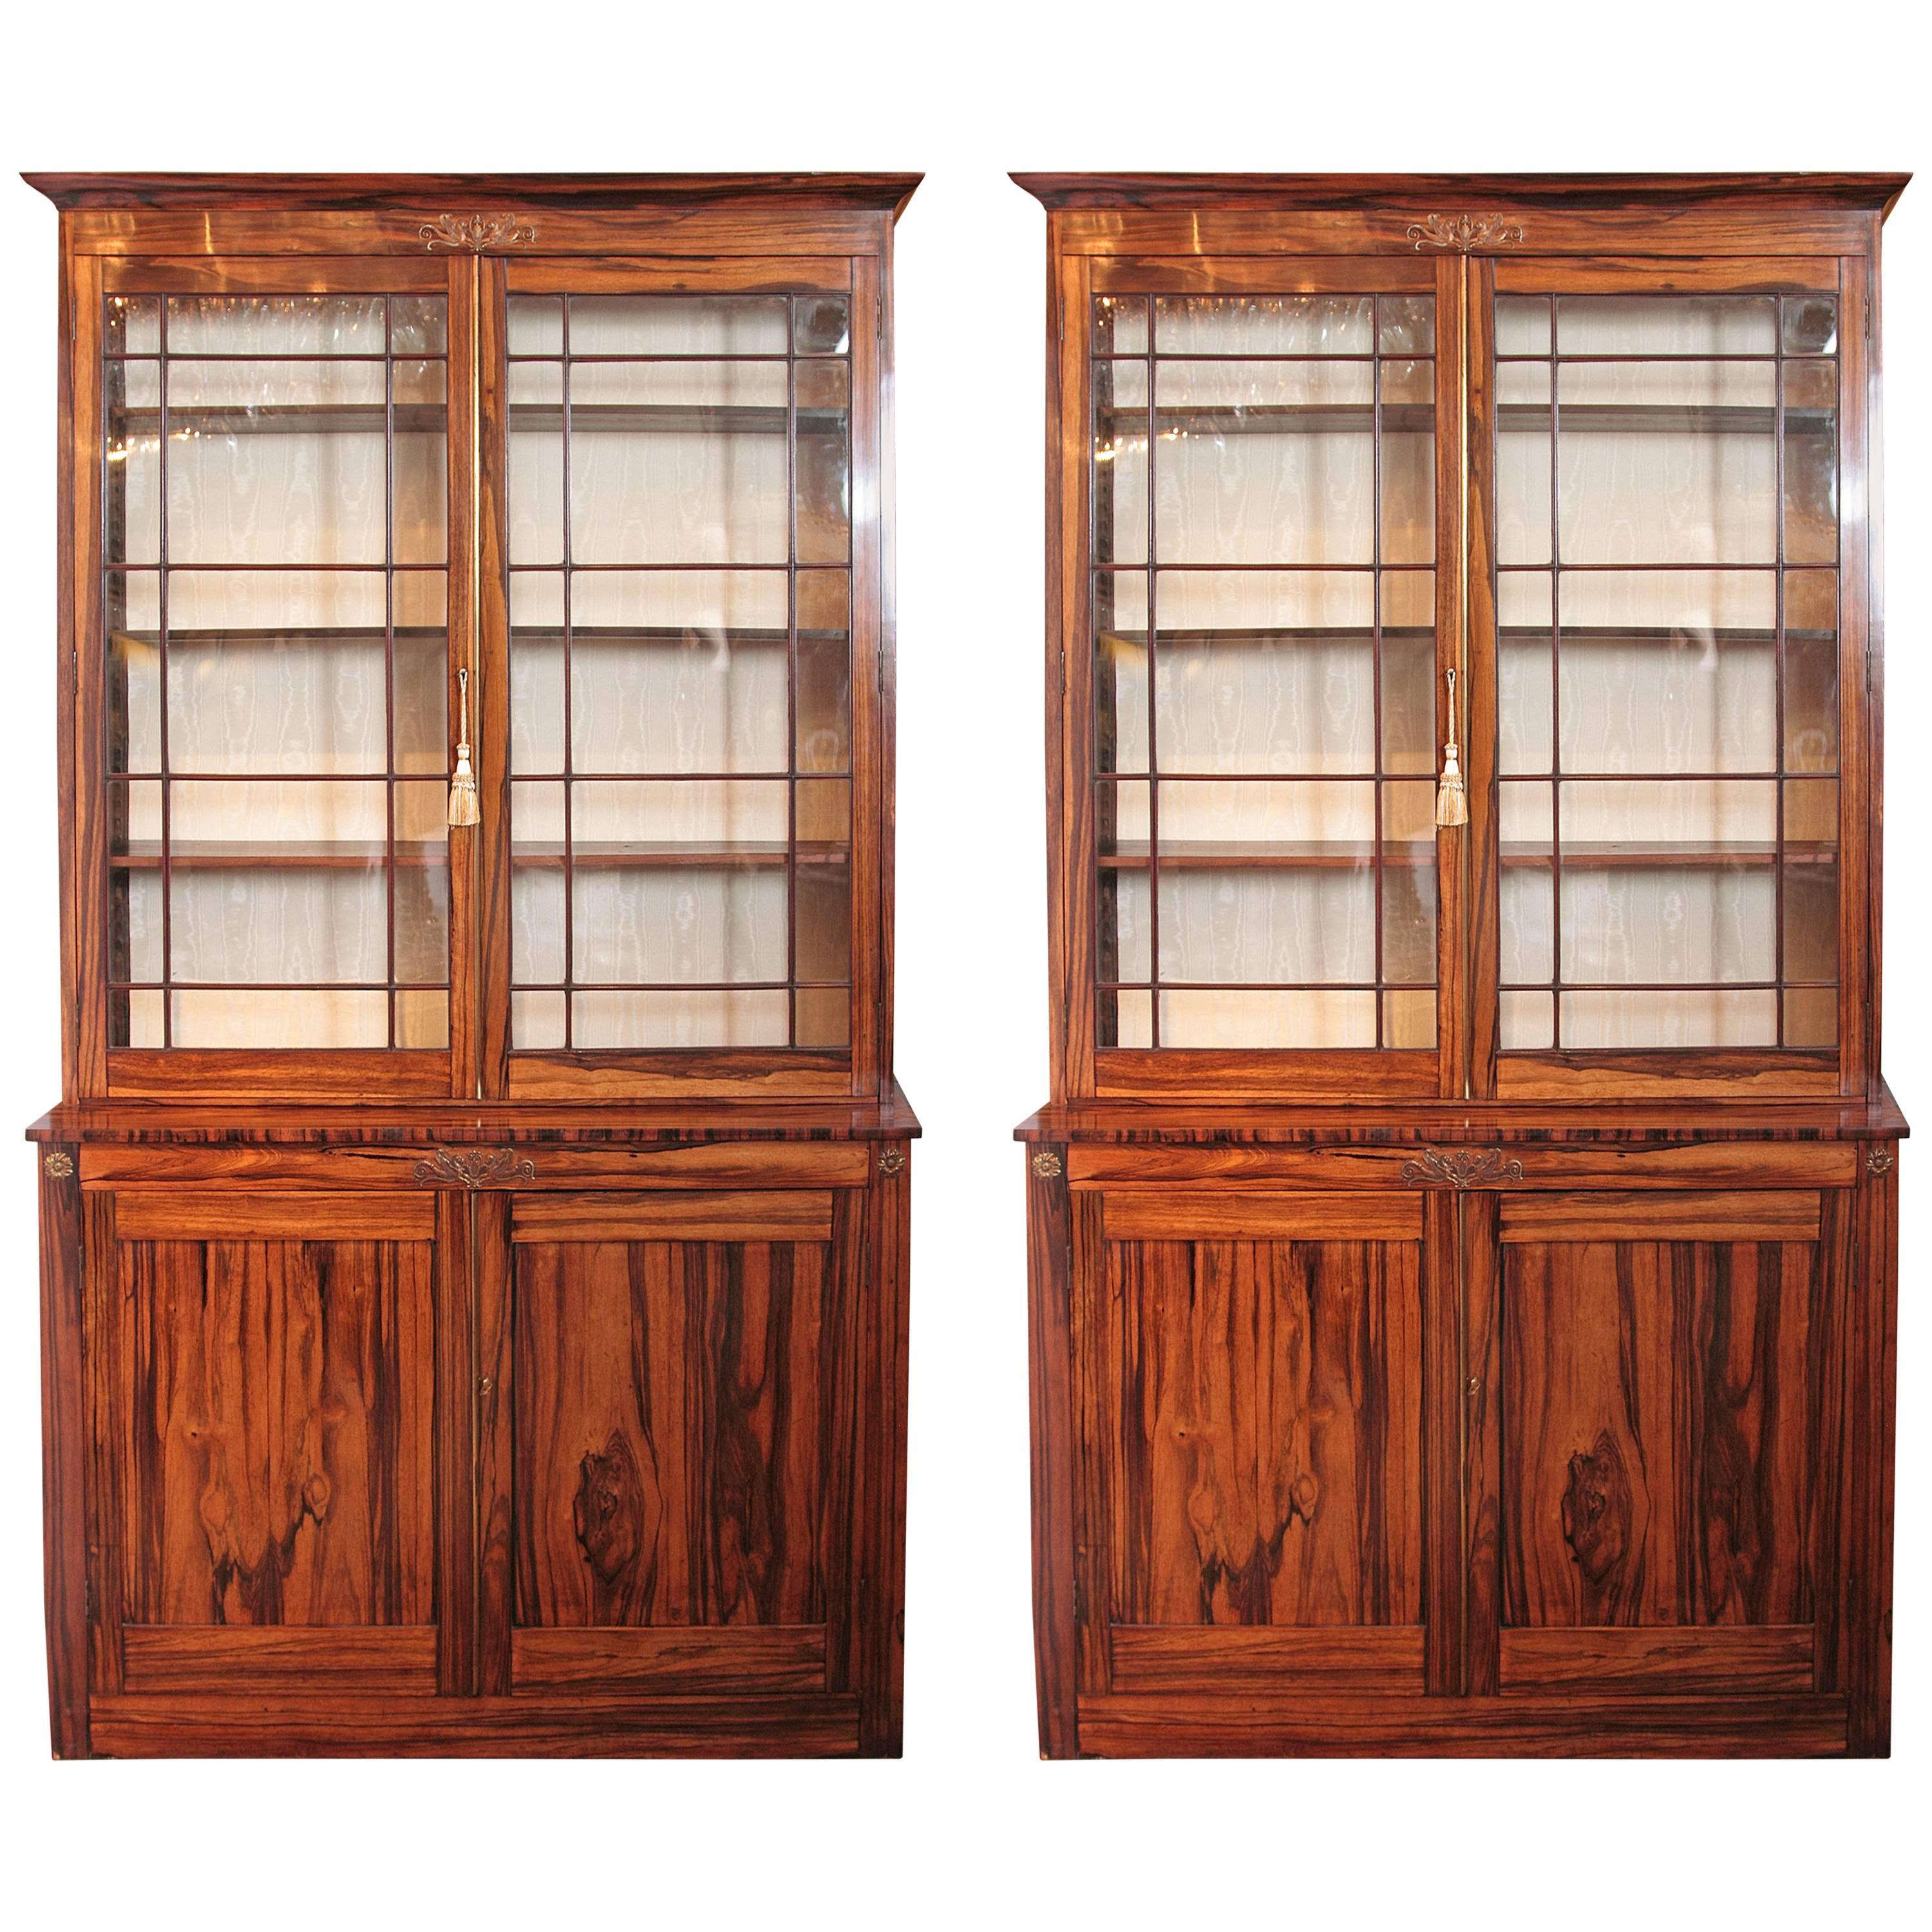 Pair of Fine Period Regency Rosewood Cabinets with Bronze Details